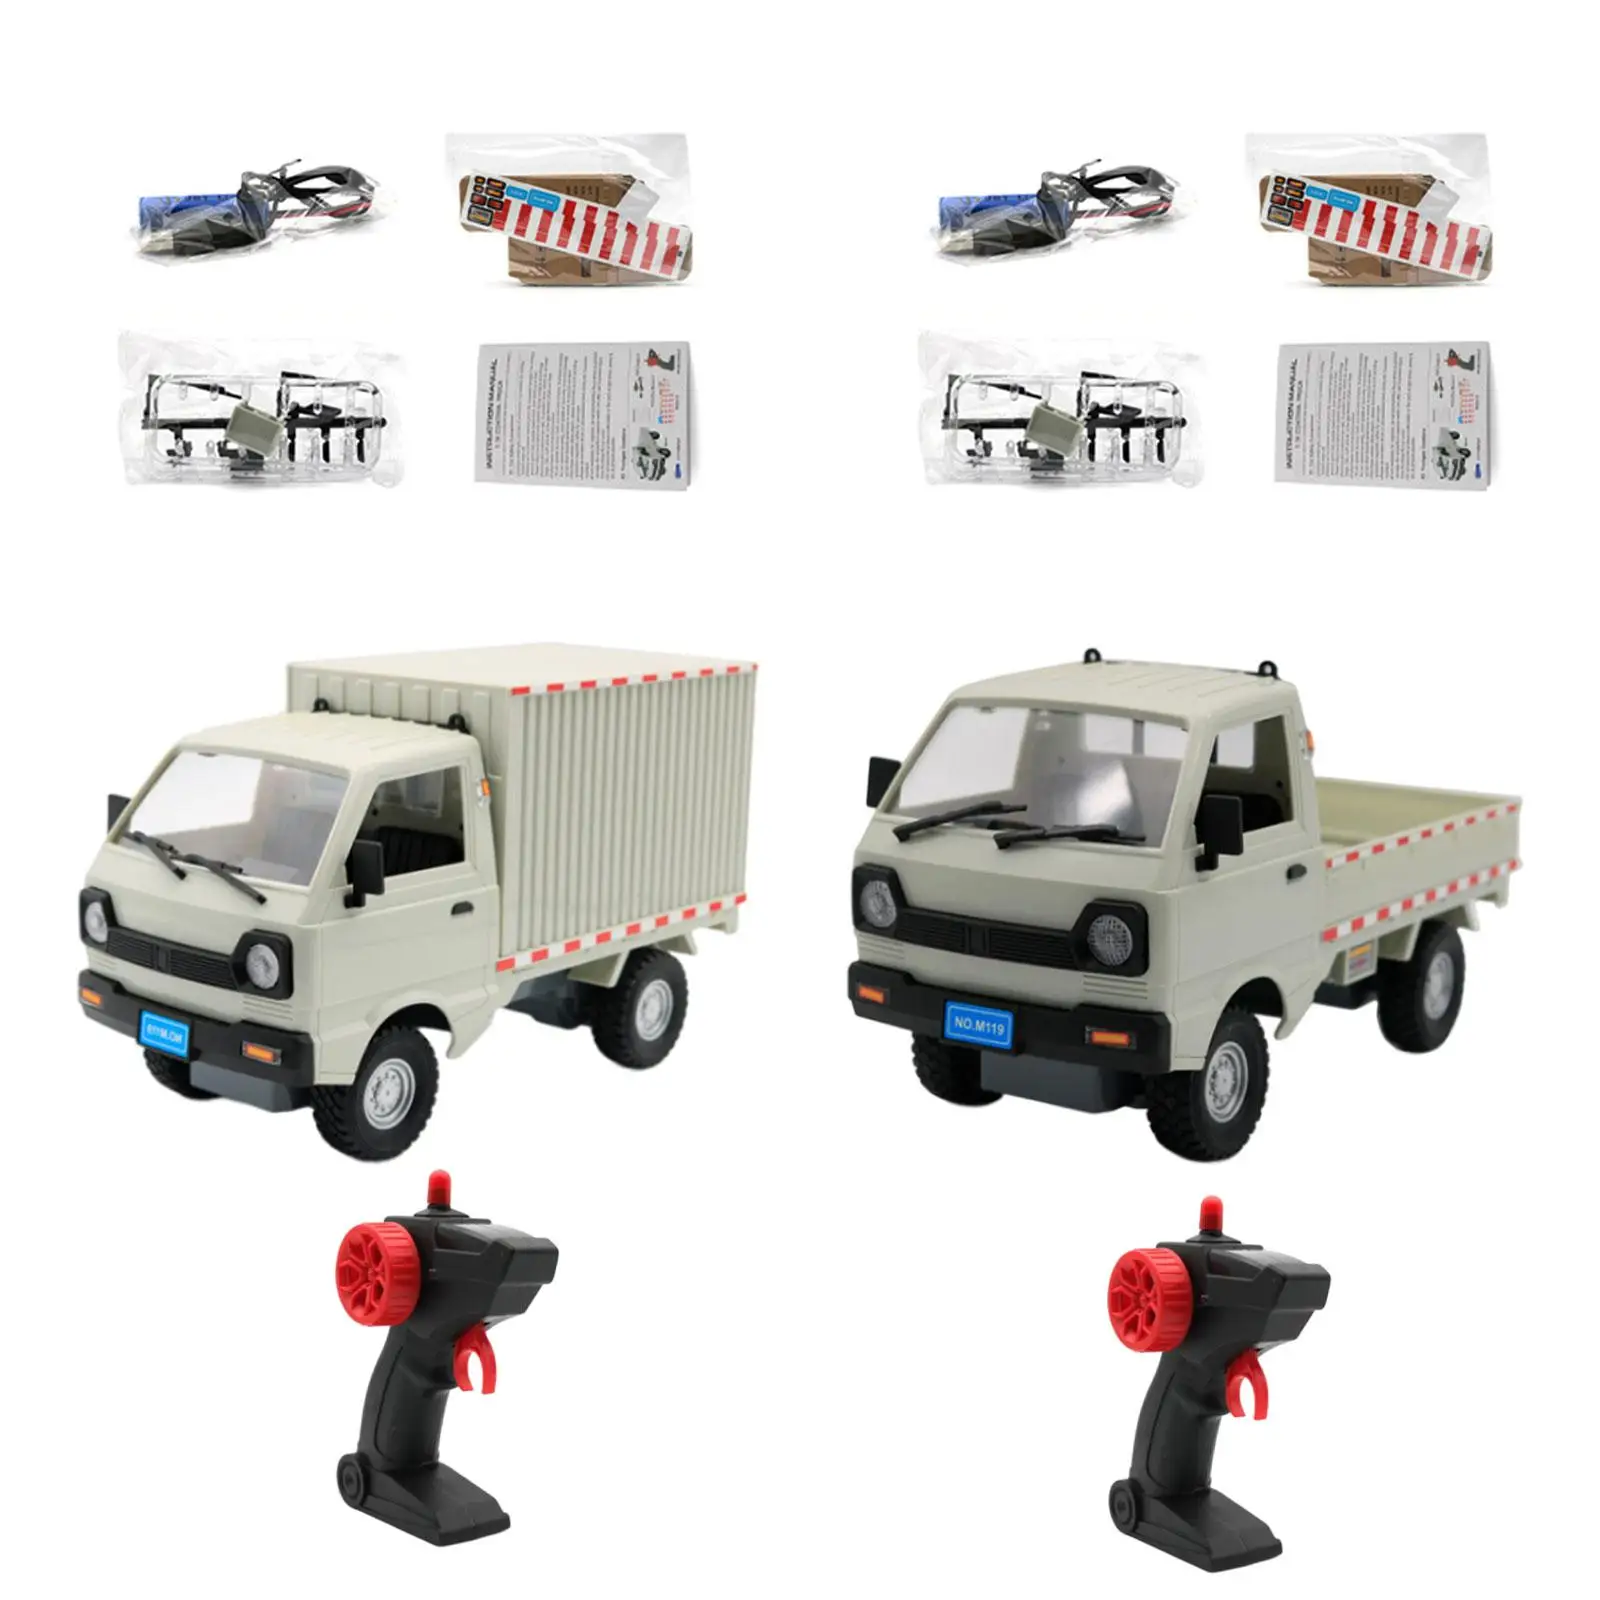 1:16 Scale High Speed RC Car Hobby Grade Cargo Truck with Headlights RC Vehicles Off Road RC Truck 2WD Wheel Drive Boy Toy Gifts